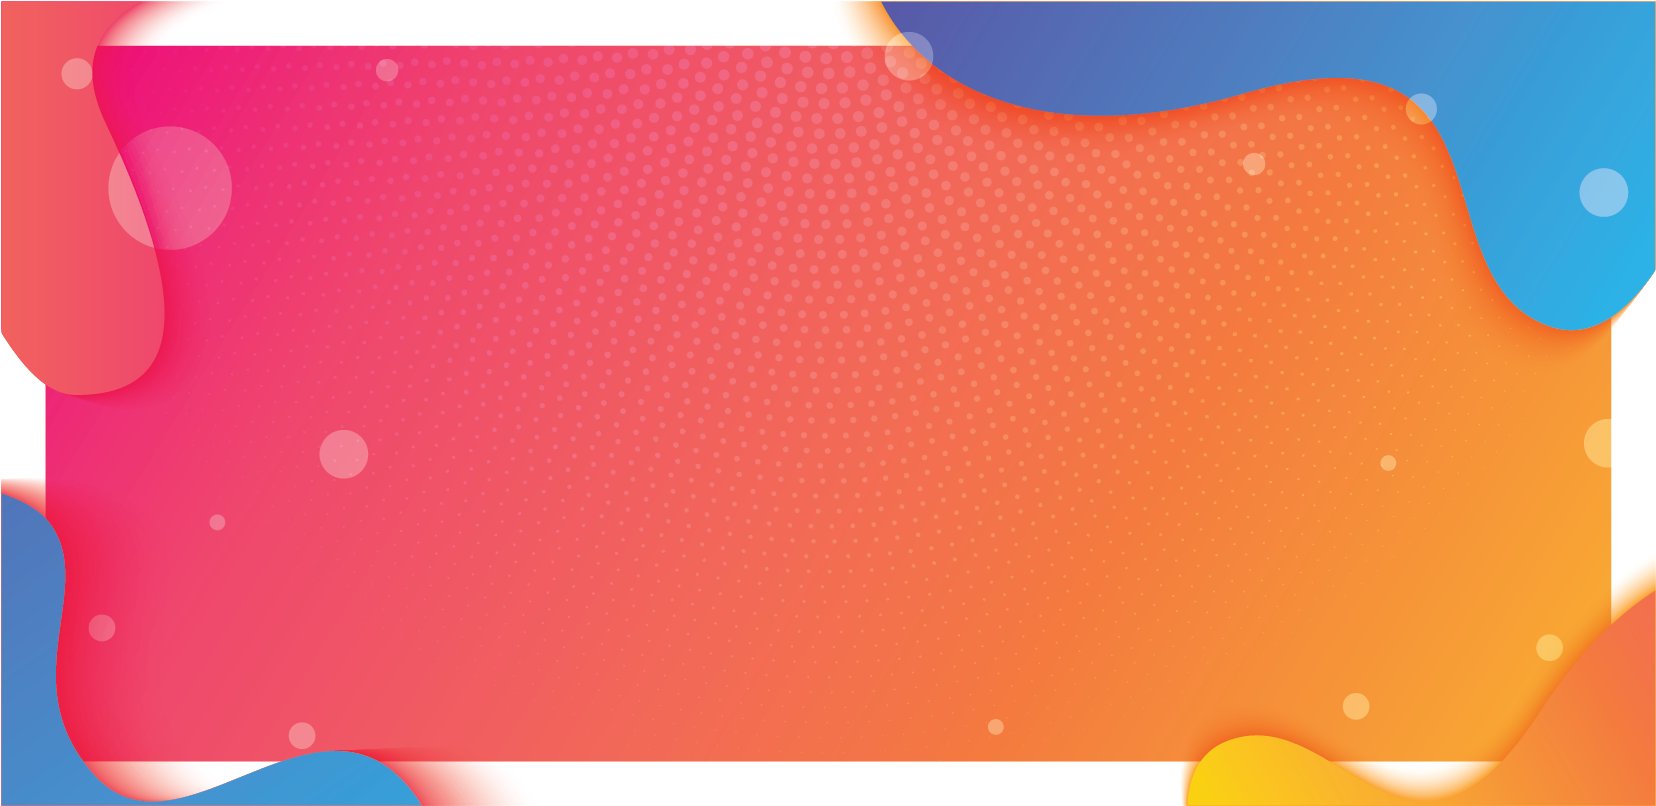 Download Pink Orange Gradient Banner White Dot With Abstract - Graphic